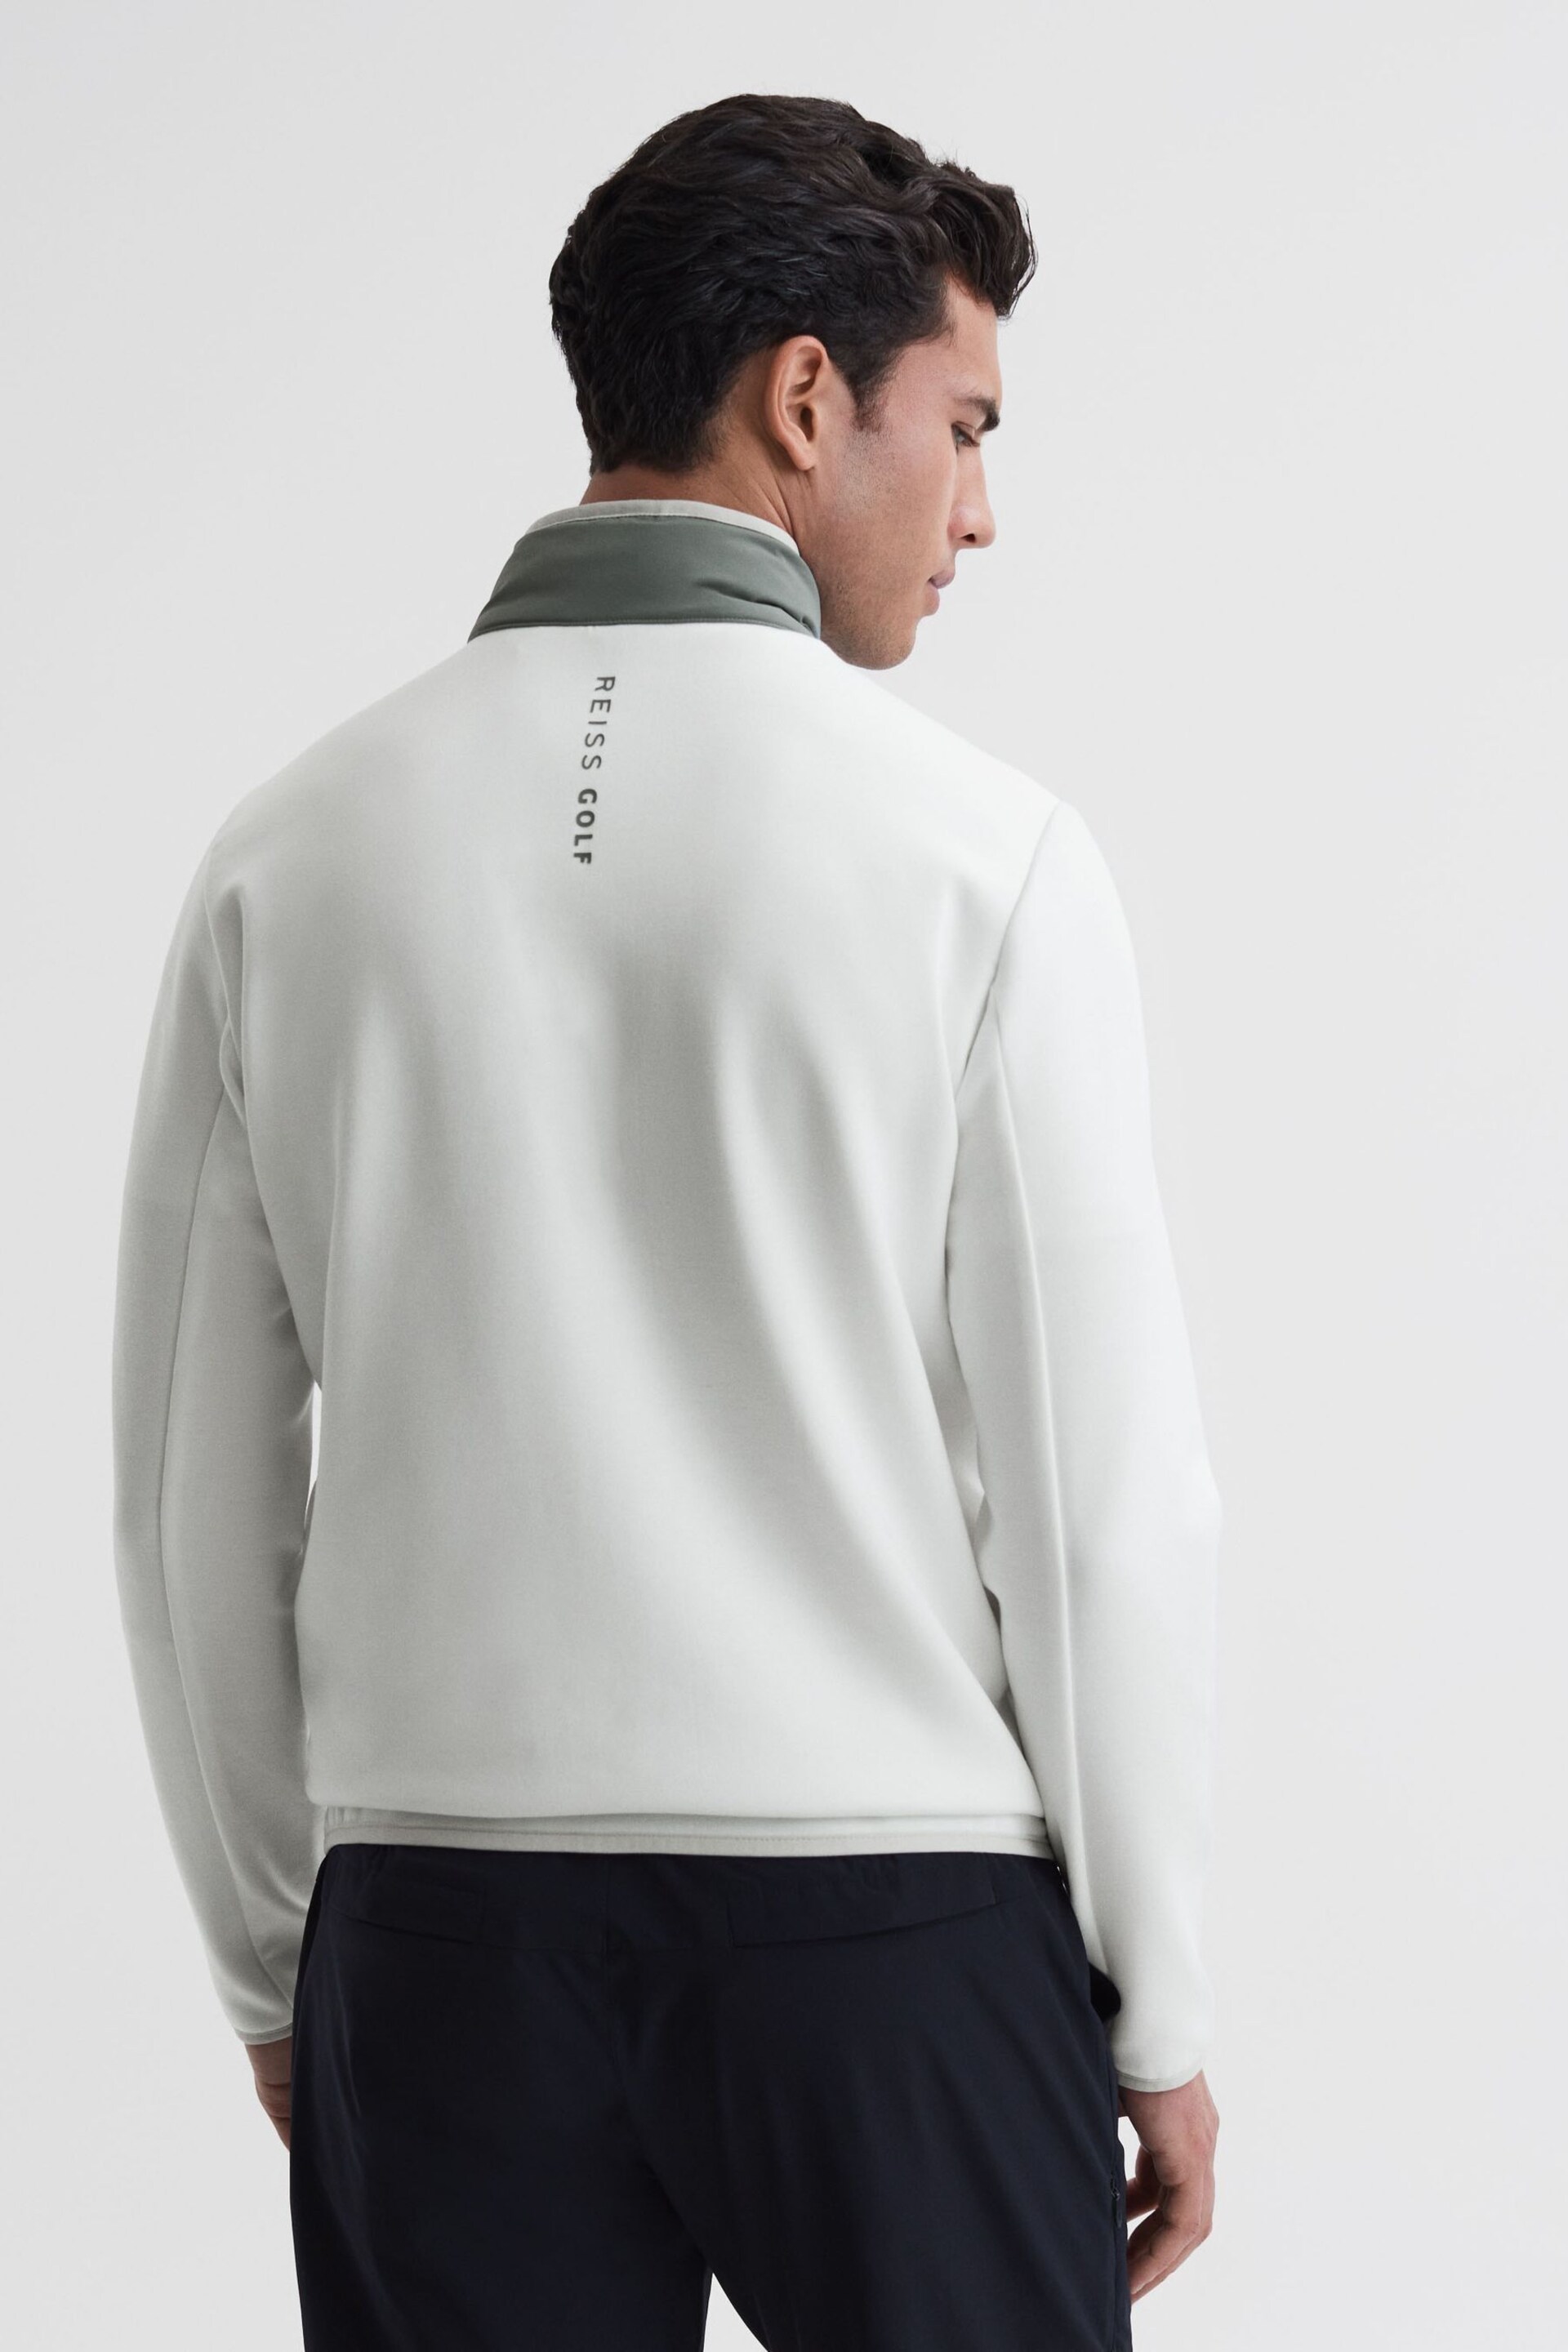 Reiss Sage/White Player Funnel Neck Hybrid Quilted Jacket - Image 5 of 7